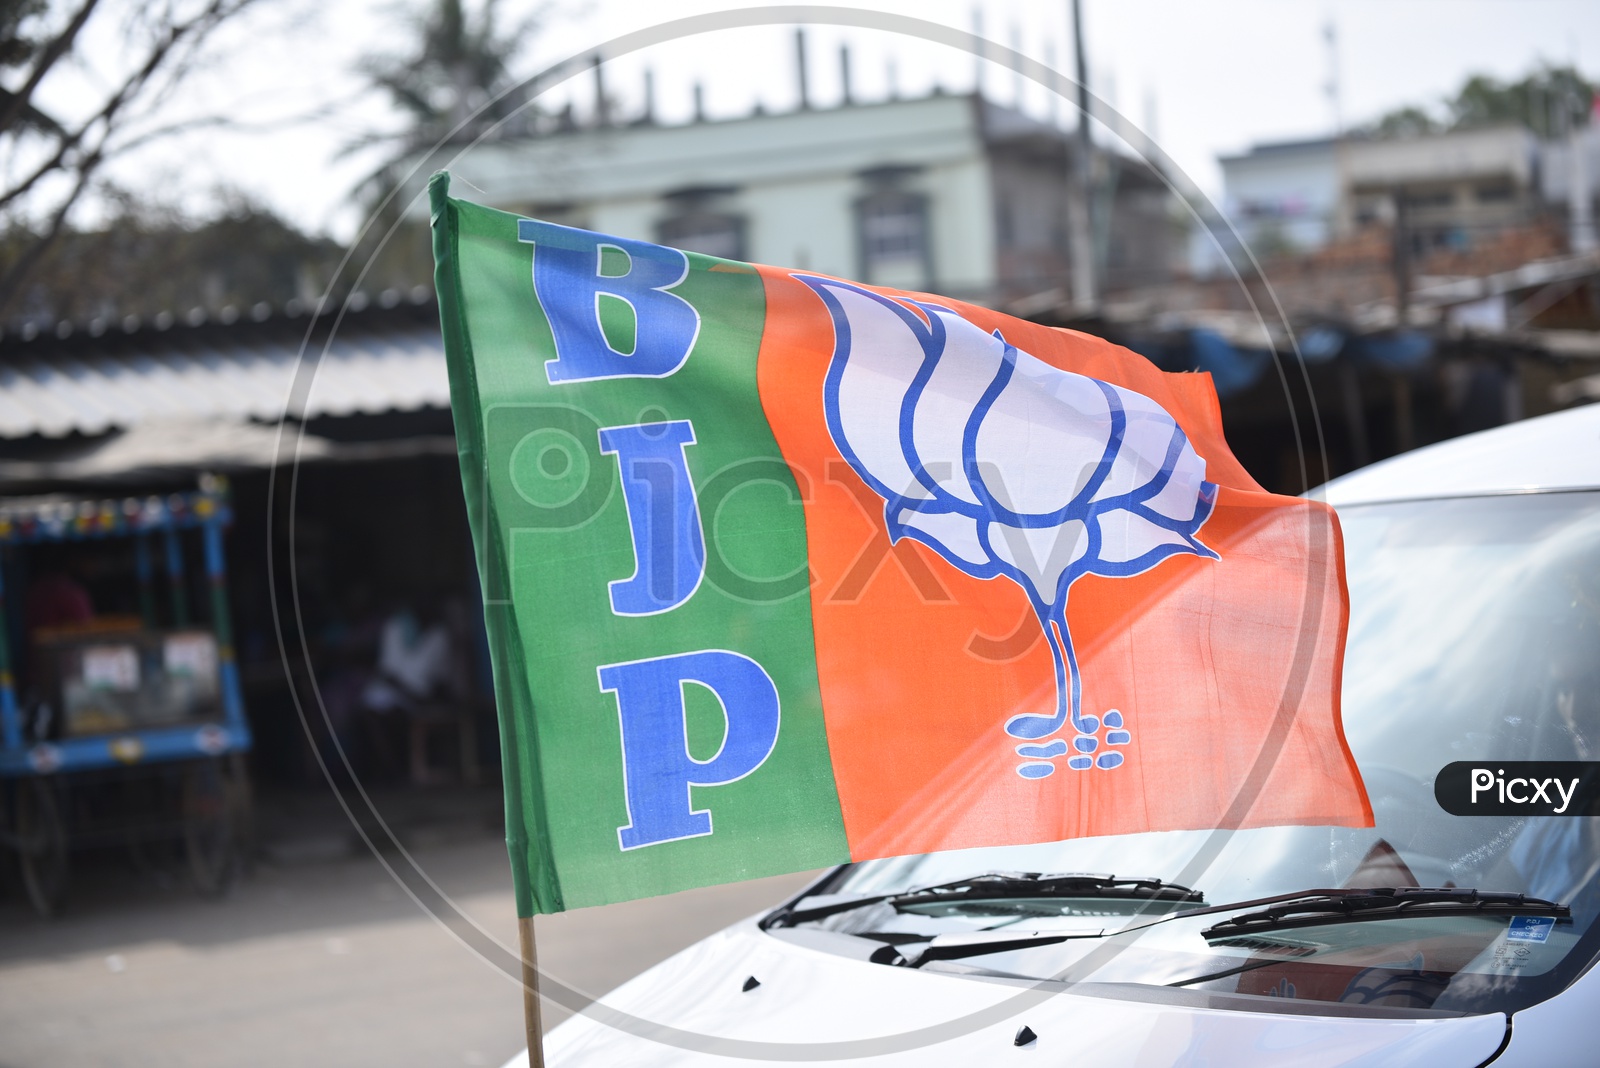 BJP Party Flag Mounted On a Car